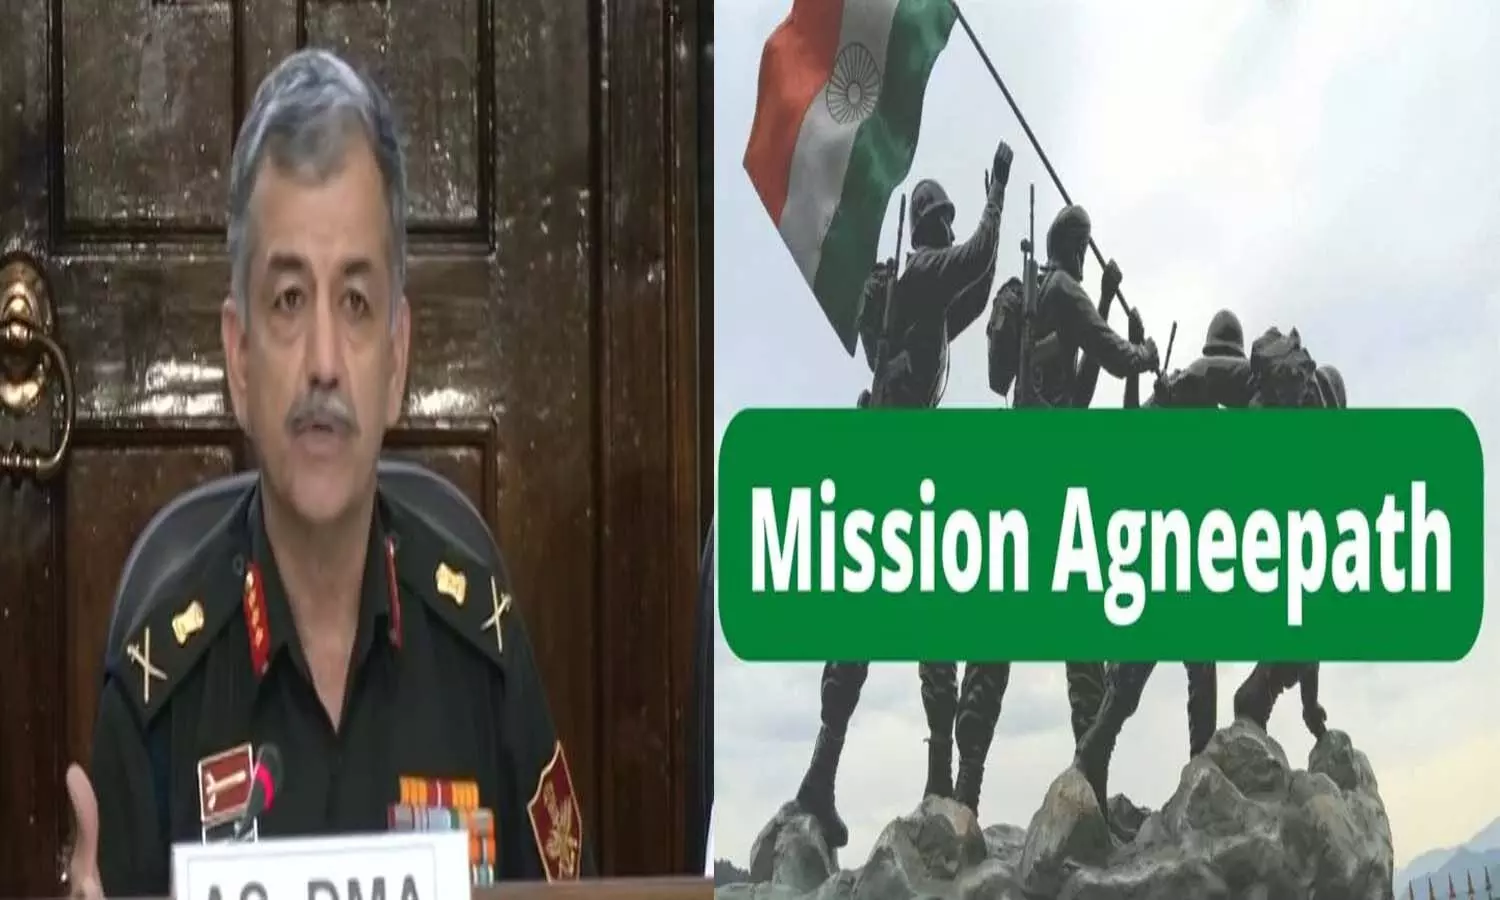 Joint Press Conference of Armed Forces on Agneepath Recruitment Scheme